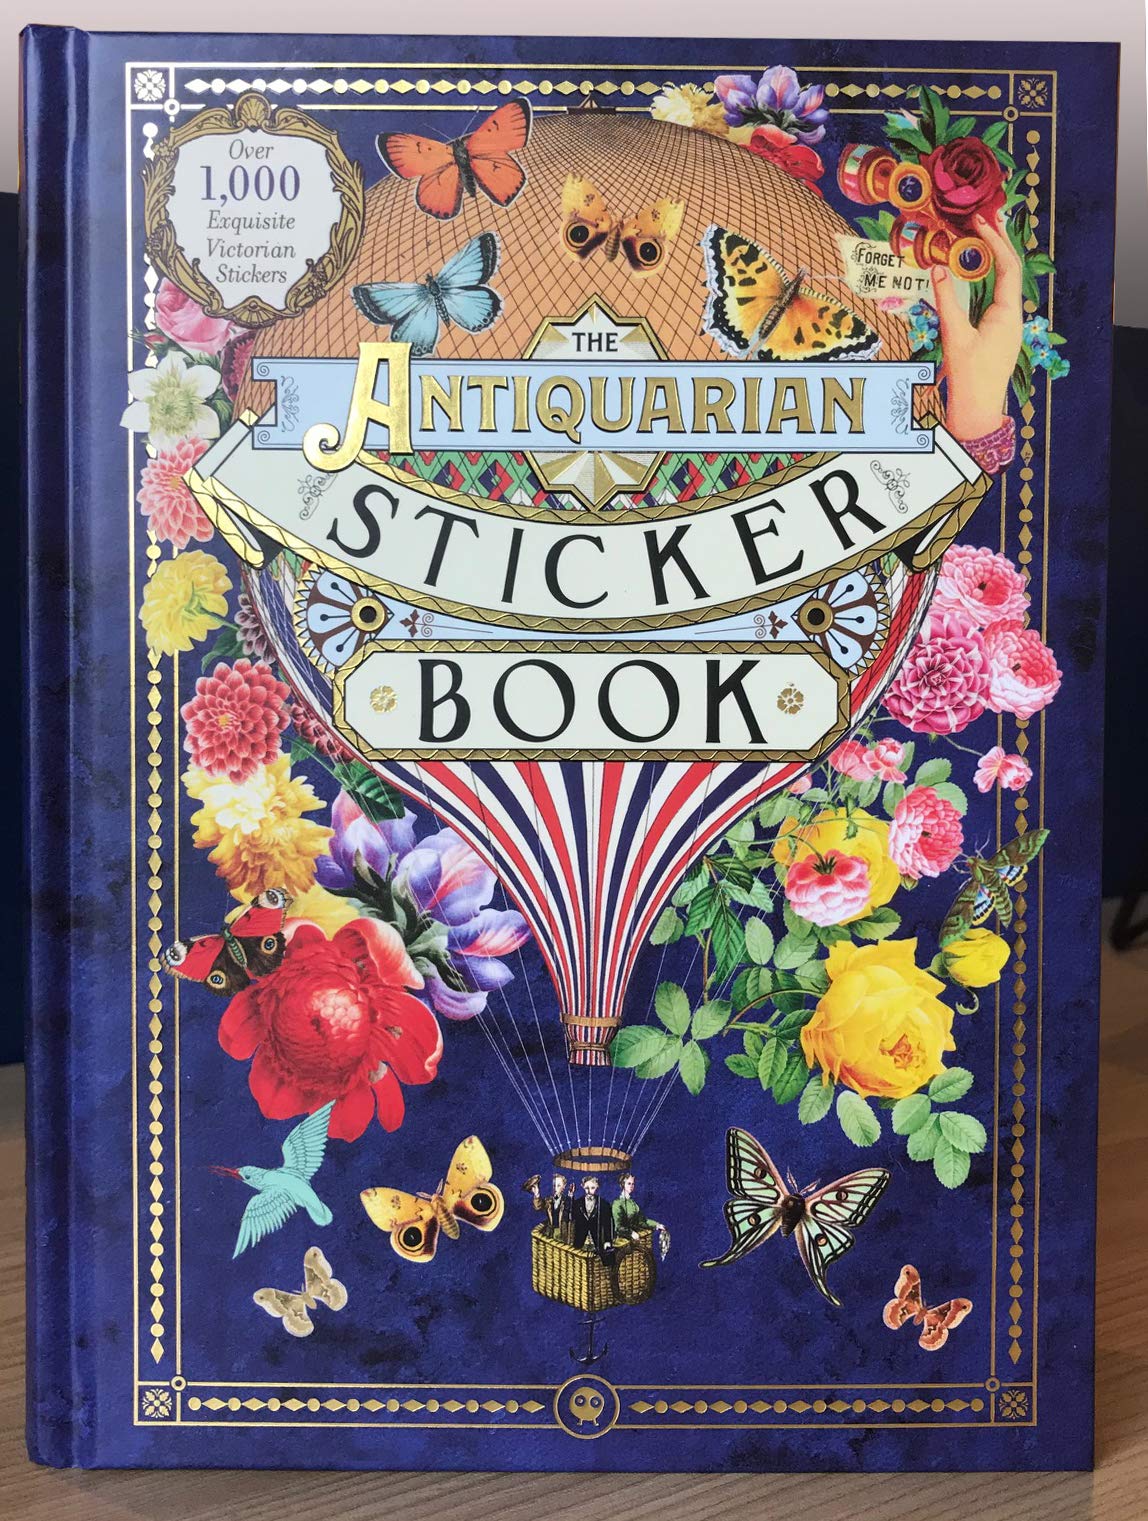 The Antiquarian Sticker Book: Over 1,000 Exquisite Victorian Stickers  Hardcover – Illustrated,2020 by Odd Dot